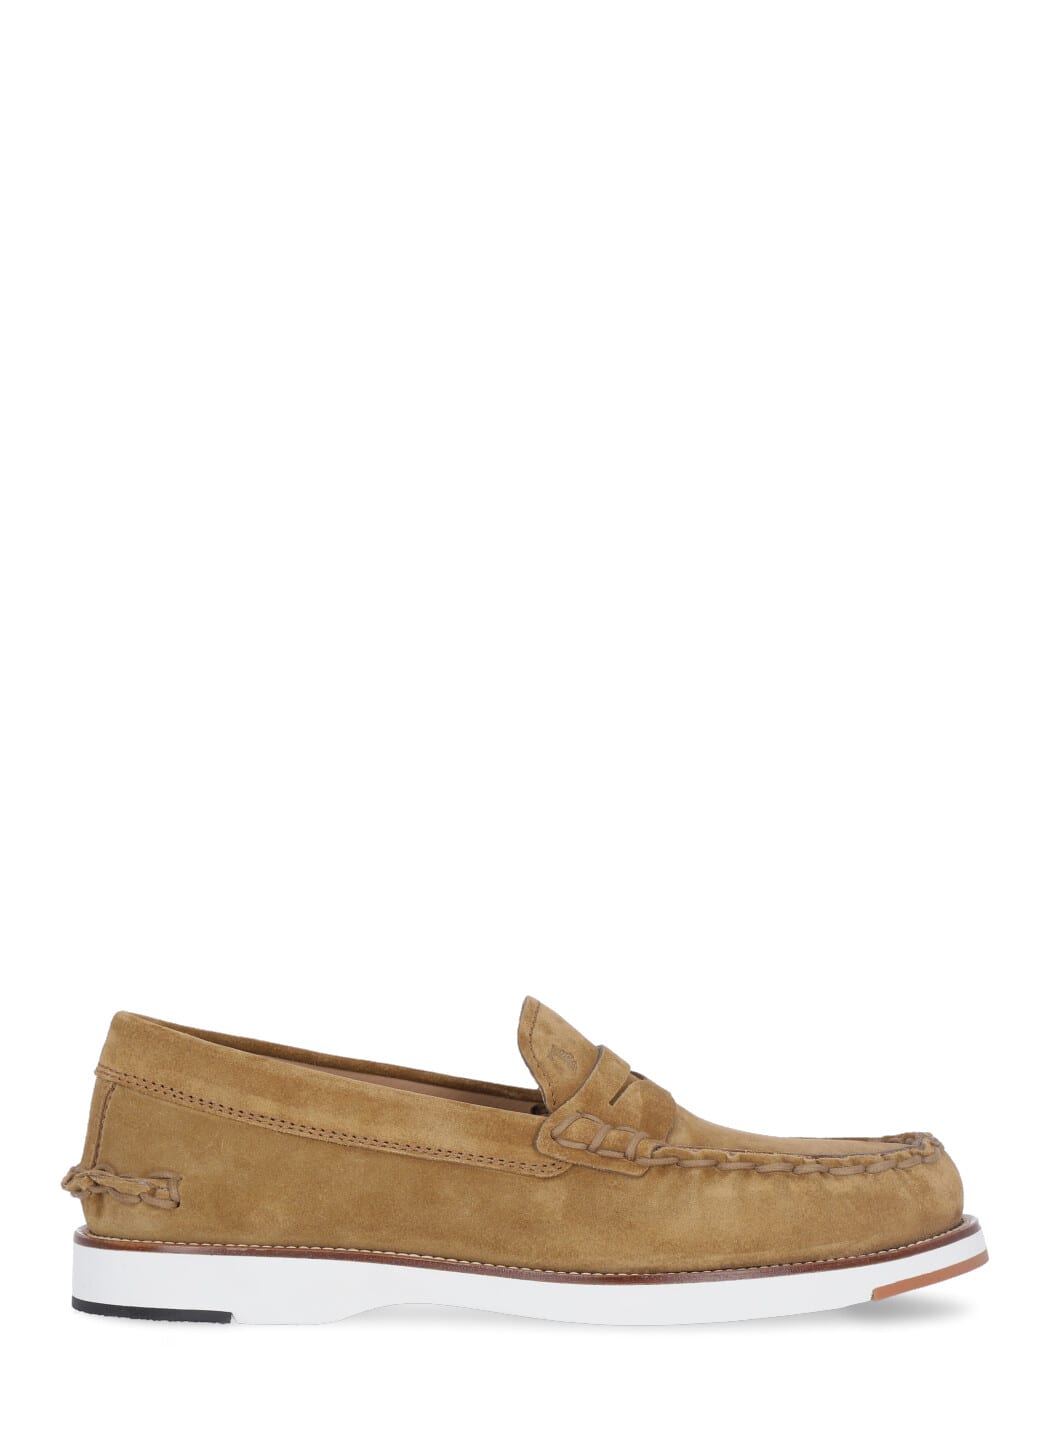 Tods Suede Leather Sneaker